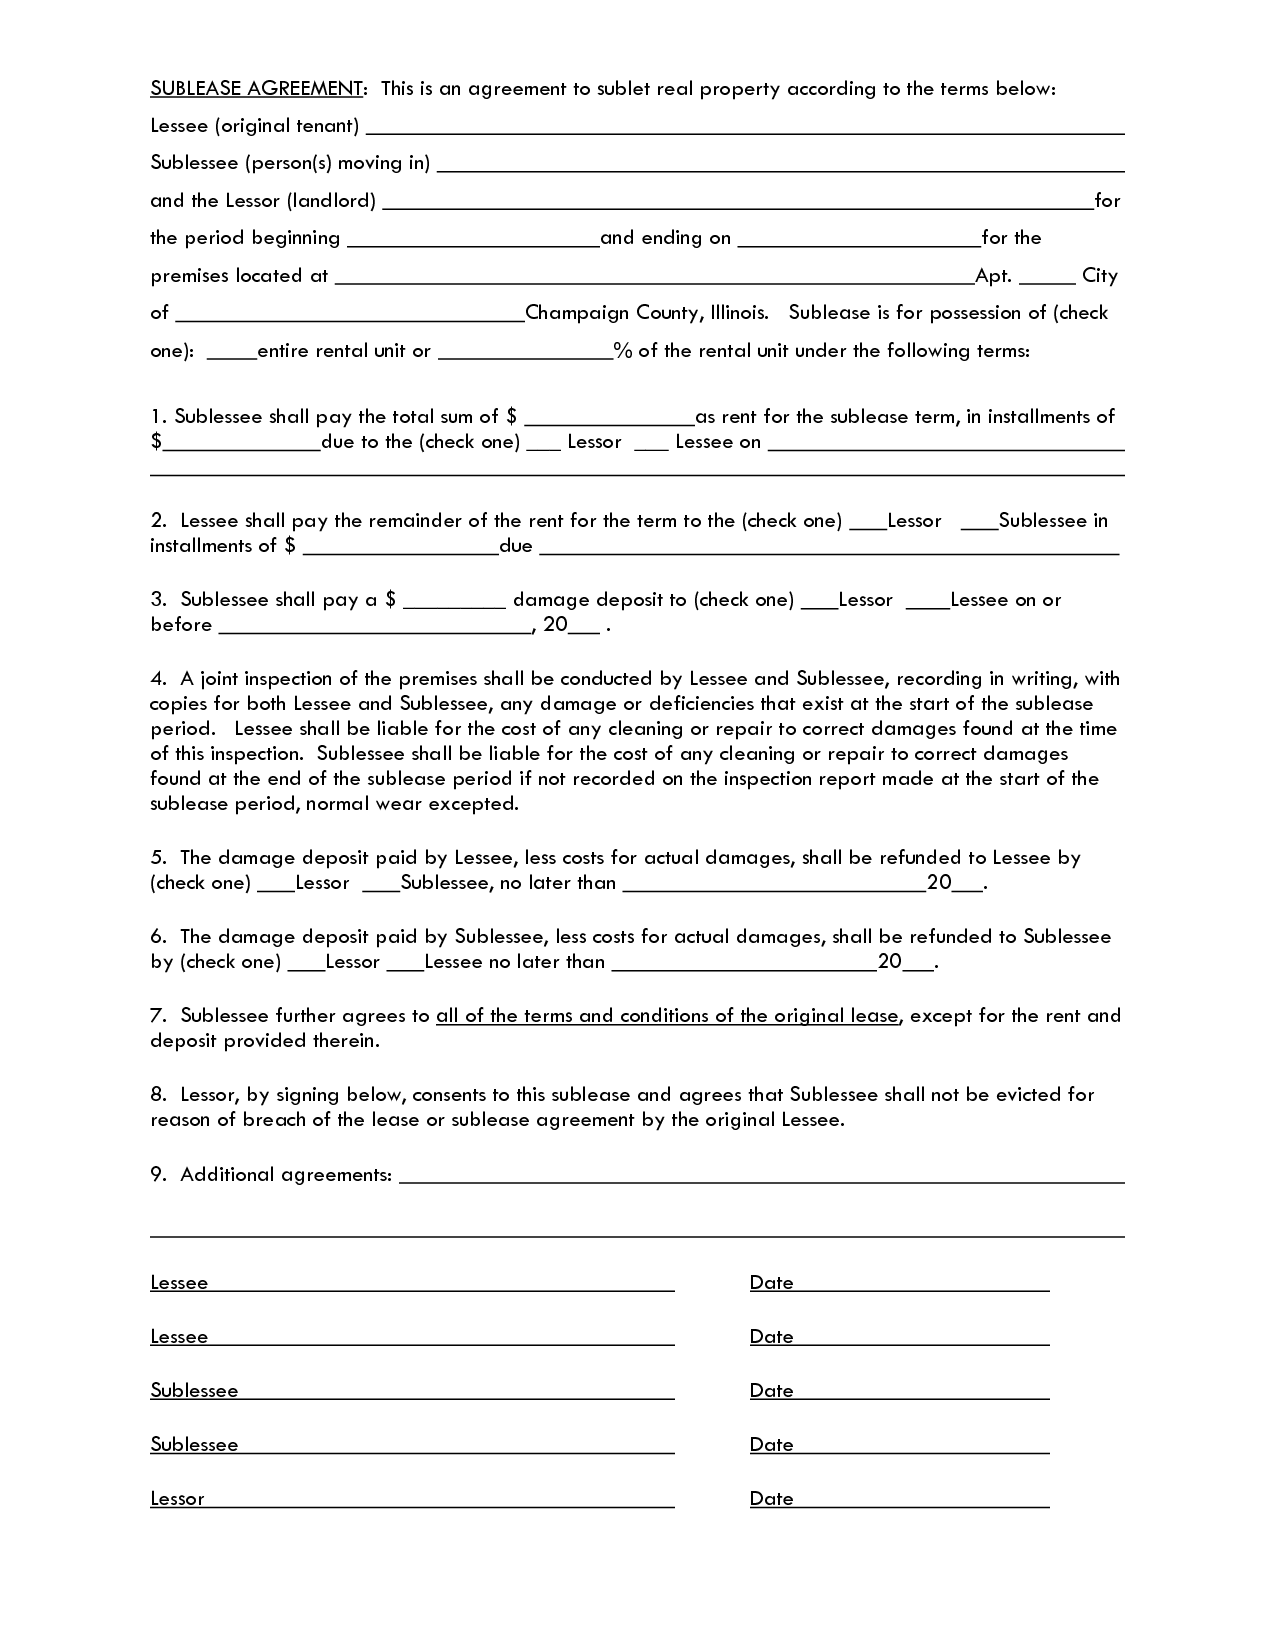 sublet-contract-free-printable-documents